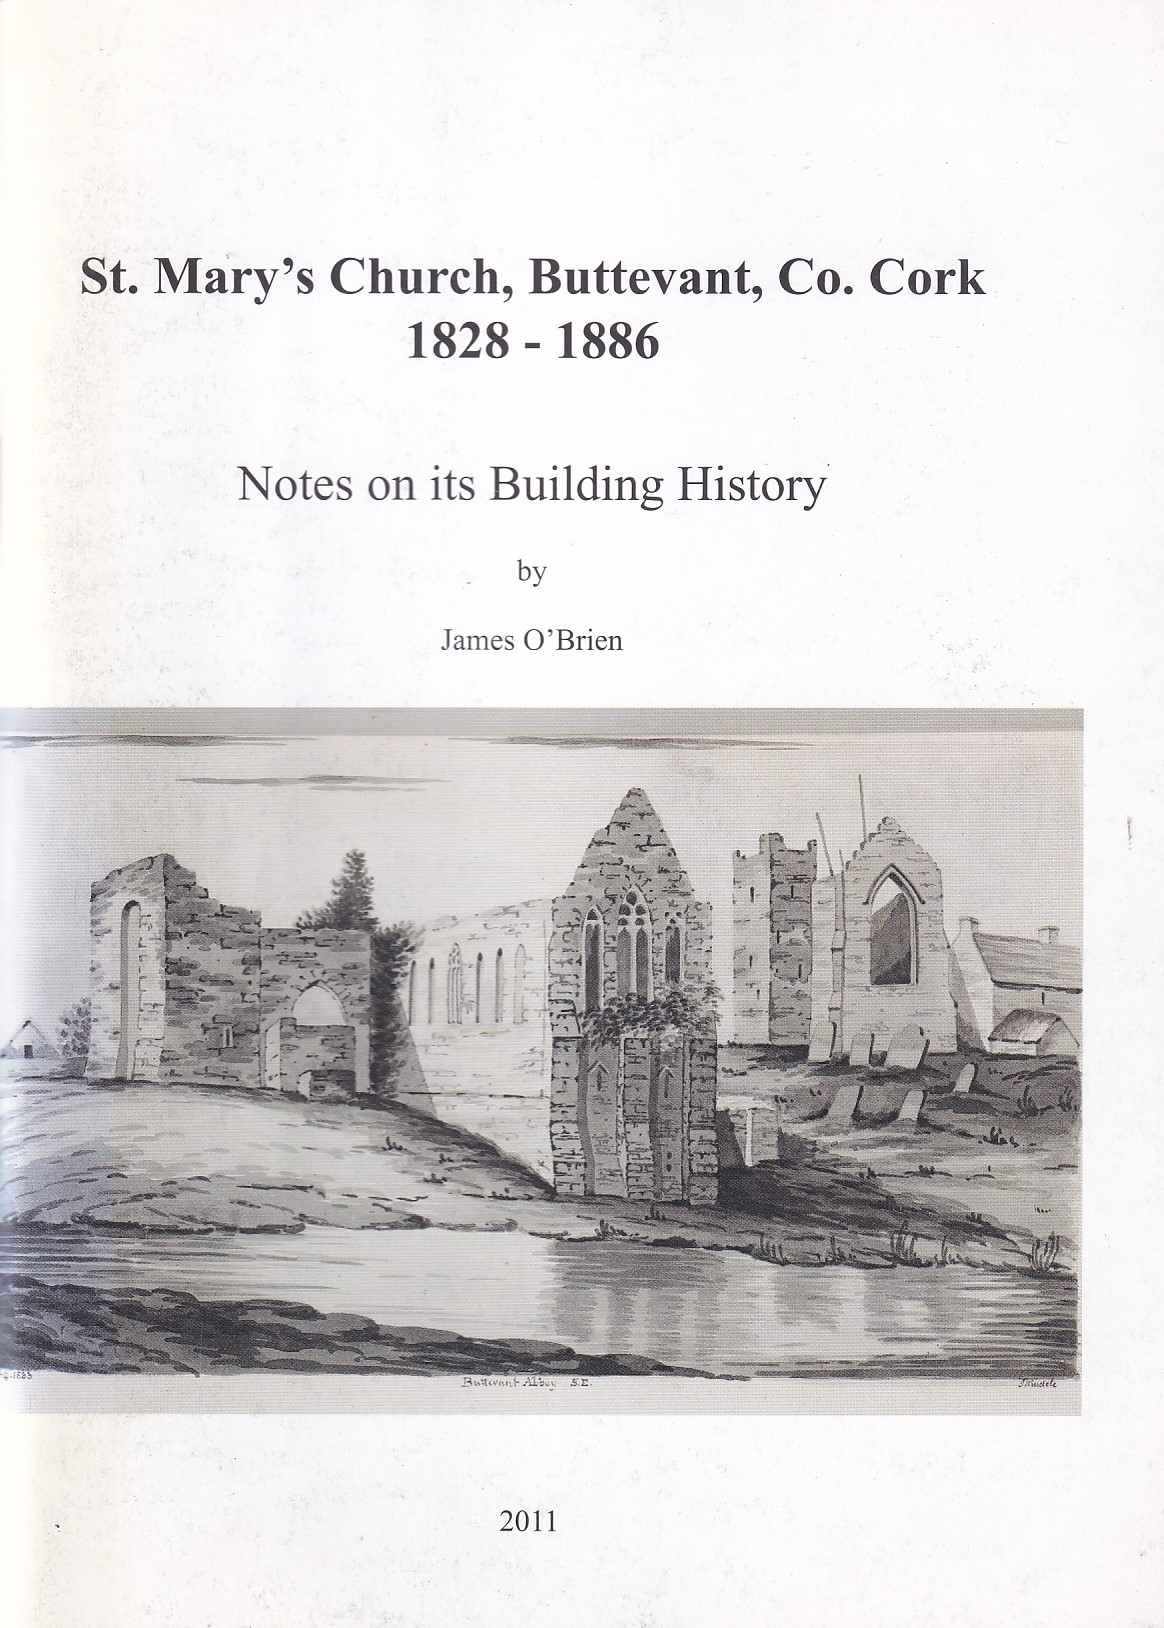 St. Mary’s Church, Buttevant, Co. Cork, 1828-1886: Notes om its Building History by James O'Brien